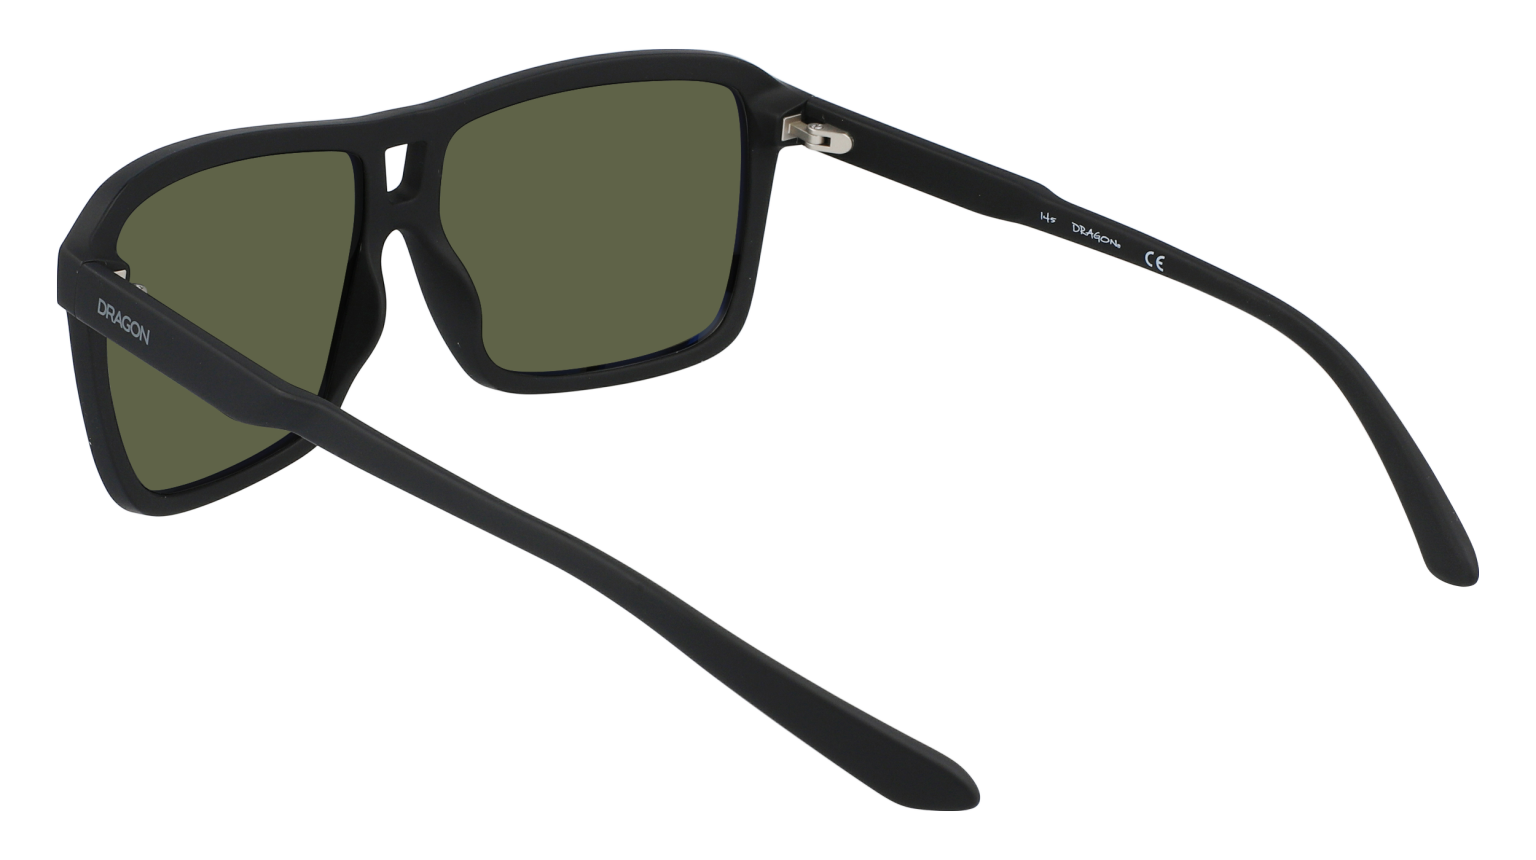 THE JAM UPCYCLED - Matte Black with Lumalens Blue Ionized Lens